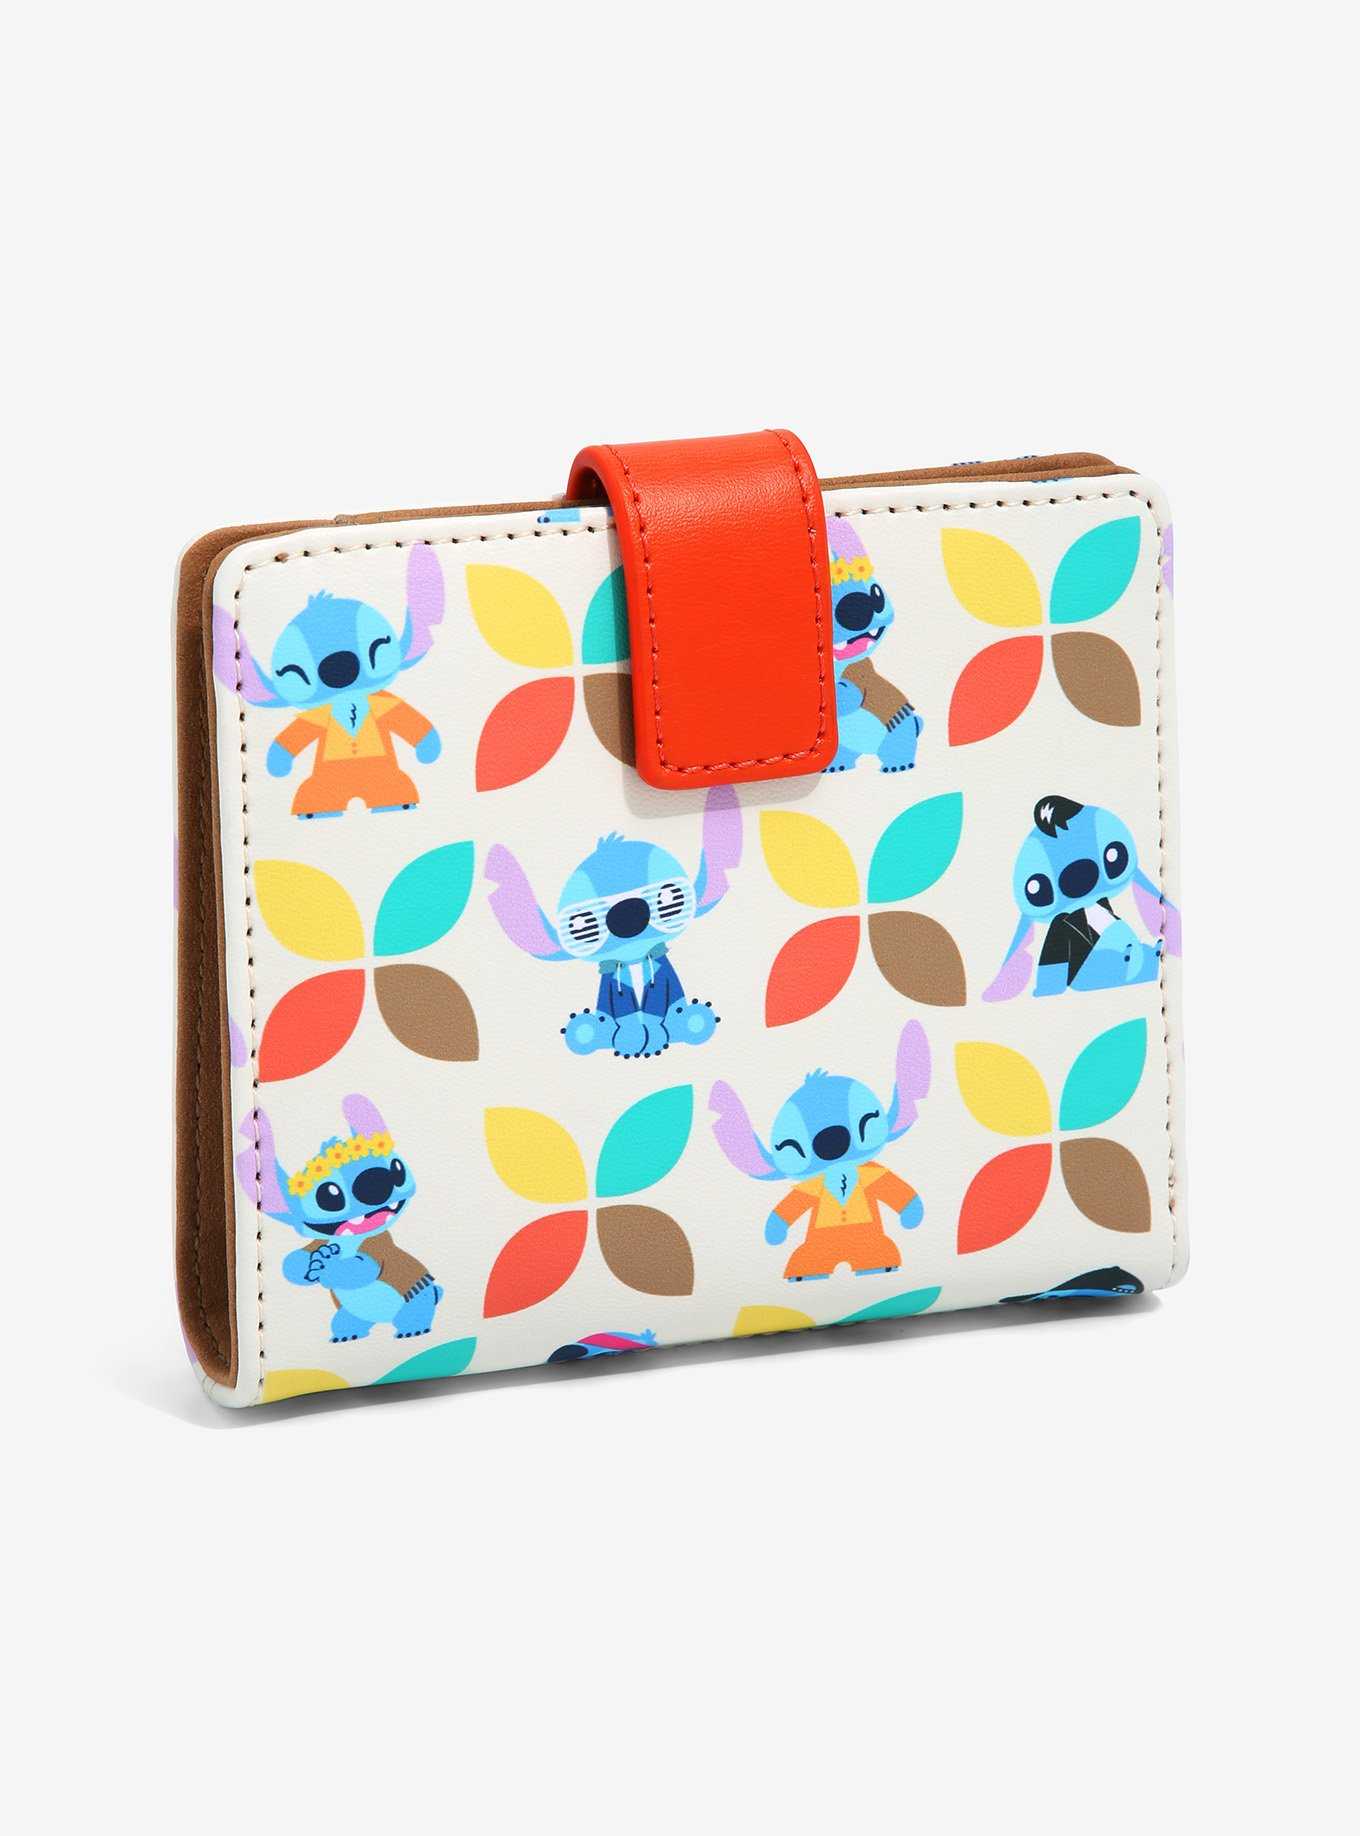 Our Universe Disney Lilo & Stitch Fruit Cosmetic Bag Set - BoxLunch  Exclusive, BoxLunch